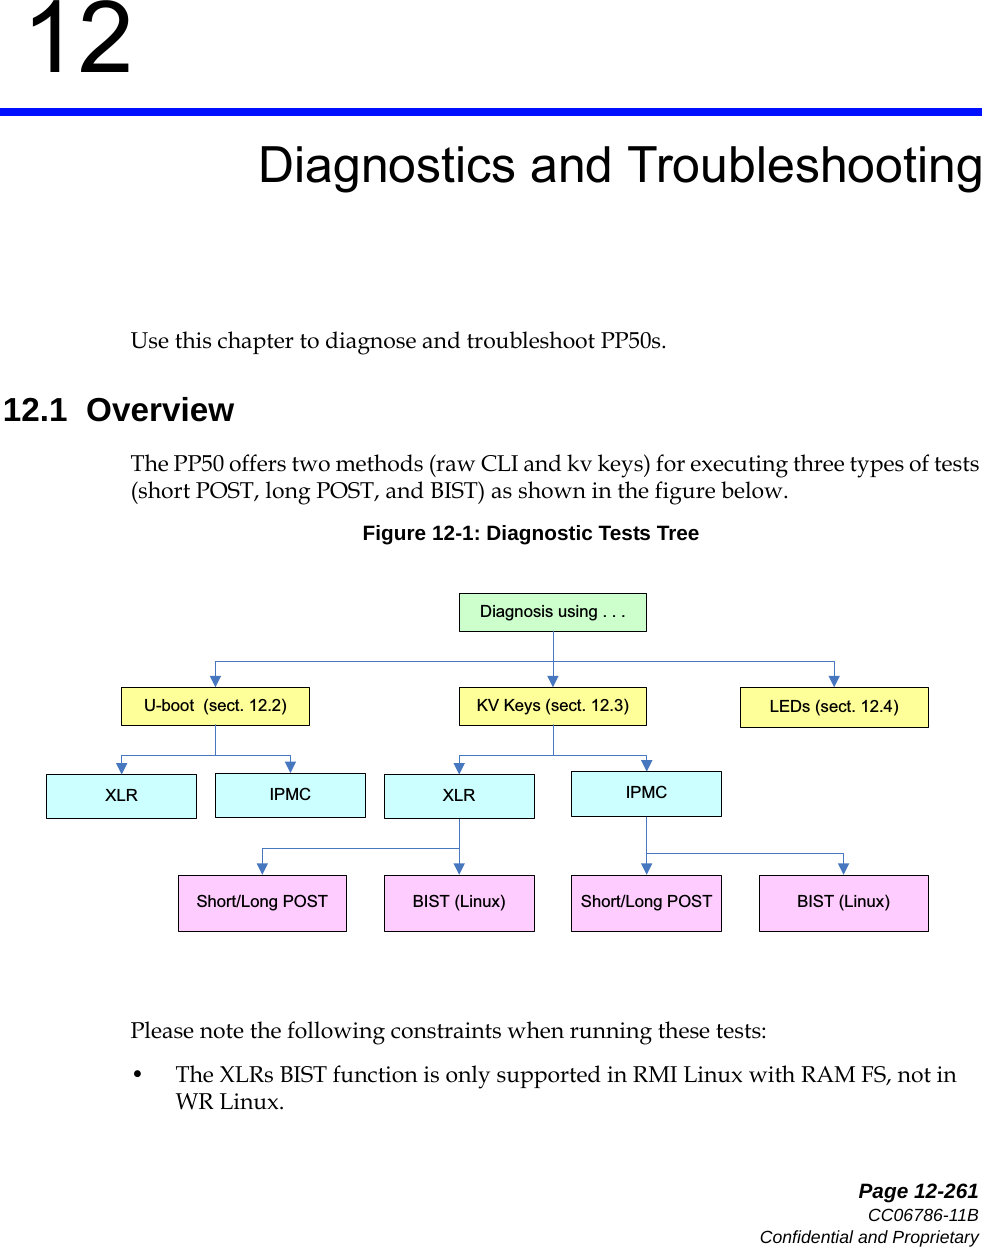   Page 12-261CC06786-11BConfidential and Proprietary12Preliminary12Diagnostics and TroubleshootingUse this chapter to diagnose and troubleshoot PP50s. 12.1  OverviewThe PP50 offers two methods (raw CLI and kv keys) for executing three types of tests (short POST, long POST, and BIST) as shown in the figure below.Figure 12-1: Diagnostic Tests TreePlease note the following constraints when running these tests:• The XLRs BIST function is only supported in RMI Linux with RAM FS, not in WR Linux. U-boot  (sect. 12.2) KV Keys (sect. 12.3)XLR IPMCShort/Long POST BIST (Linux)Short/Long POST BIST (Linux)IPMCXLRLEDs (sect. 12.4)Diagnosis using . . .